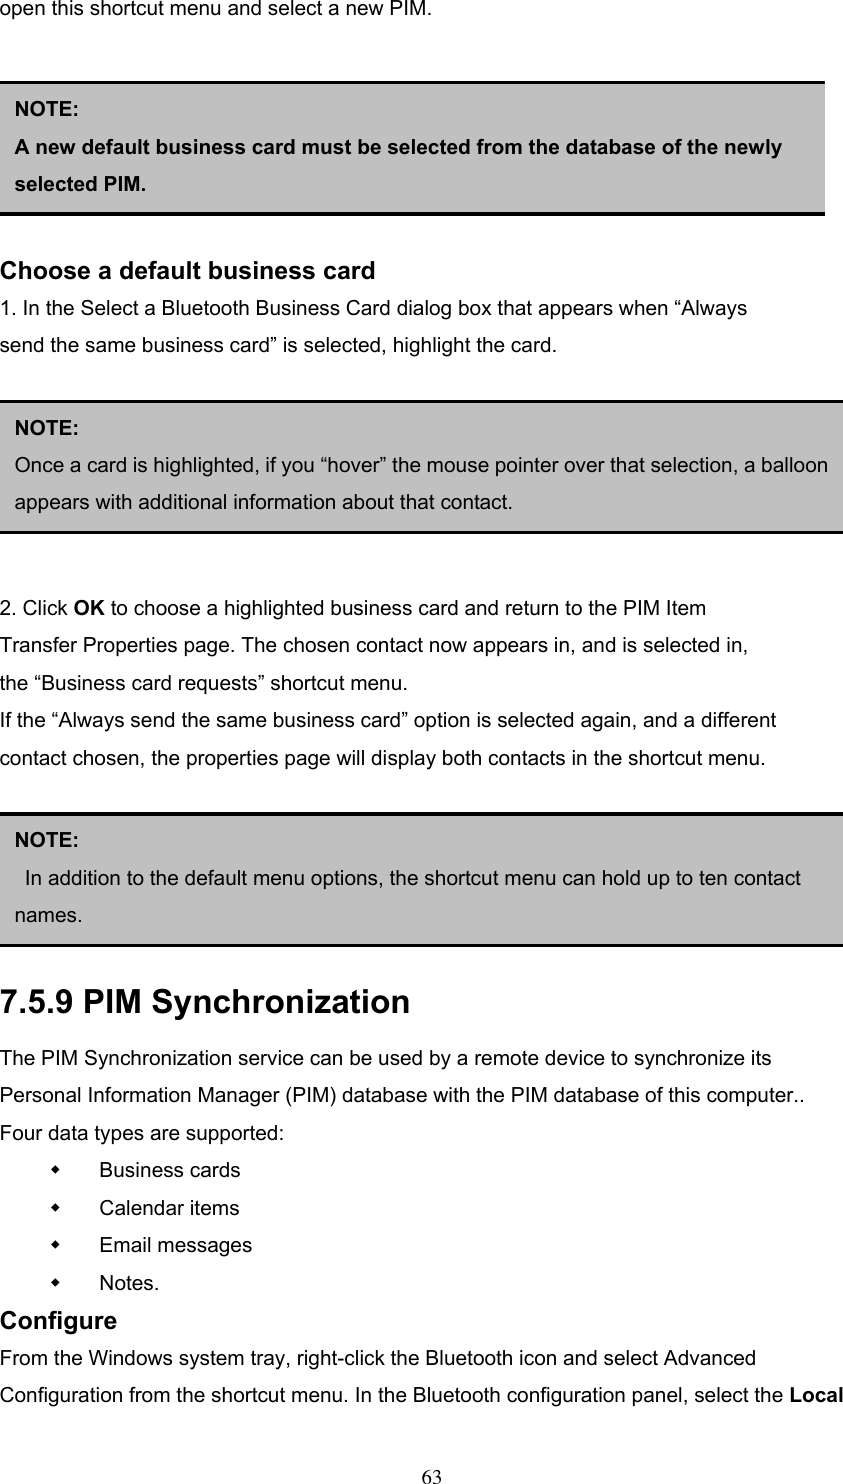 open this shortcut menu and select a new PIM.       Choose a default business card 1. In the Select a Bluetooth Business Card dialog box that appears when “Always send the same business card” is selected, highlight the card.       2. Click OK to choose a highlighted business card and return to the PIM Item Transfer Properties page. The chosen contact now appears in, and is selected in, the “Business card requests” shortcut menu. If the “Always send the same business card” option is selected again, and a different contact chosen, the properties page will display both contacts in the shortcut menu.      NOTE:  A new default business card must be selected from the database of the newly selected PIM. NOTE:  Once a card is highlighted, if you “hover” the mouse pointer over that selection, a balloonappears with additional information about that contact. NOTE:   In addition to the default menu options, the shortcut menu can hold up to ten contact names. 7.5.9 PIM Synchronization The PIM Synchronization service can be used by a remote device to synchronize its Personal Information Manager (PIM) database with the PIM database of this computer.. Four data types are supported:   Business cards   Calendar items   Email messages   Notes. Configure From the Windows system tray, right-click the Bluetooth icon and select Advanced Configuration from the shortcut menu. In the Bluetooth configuration panel, select the Local  63 